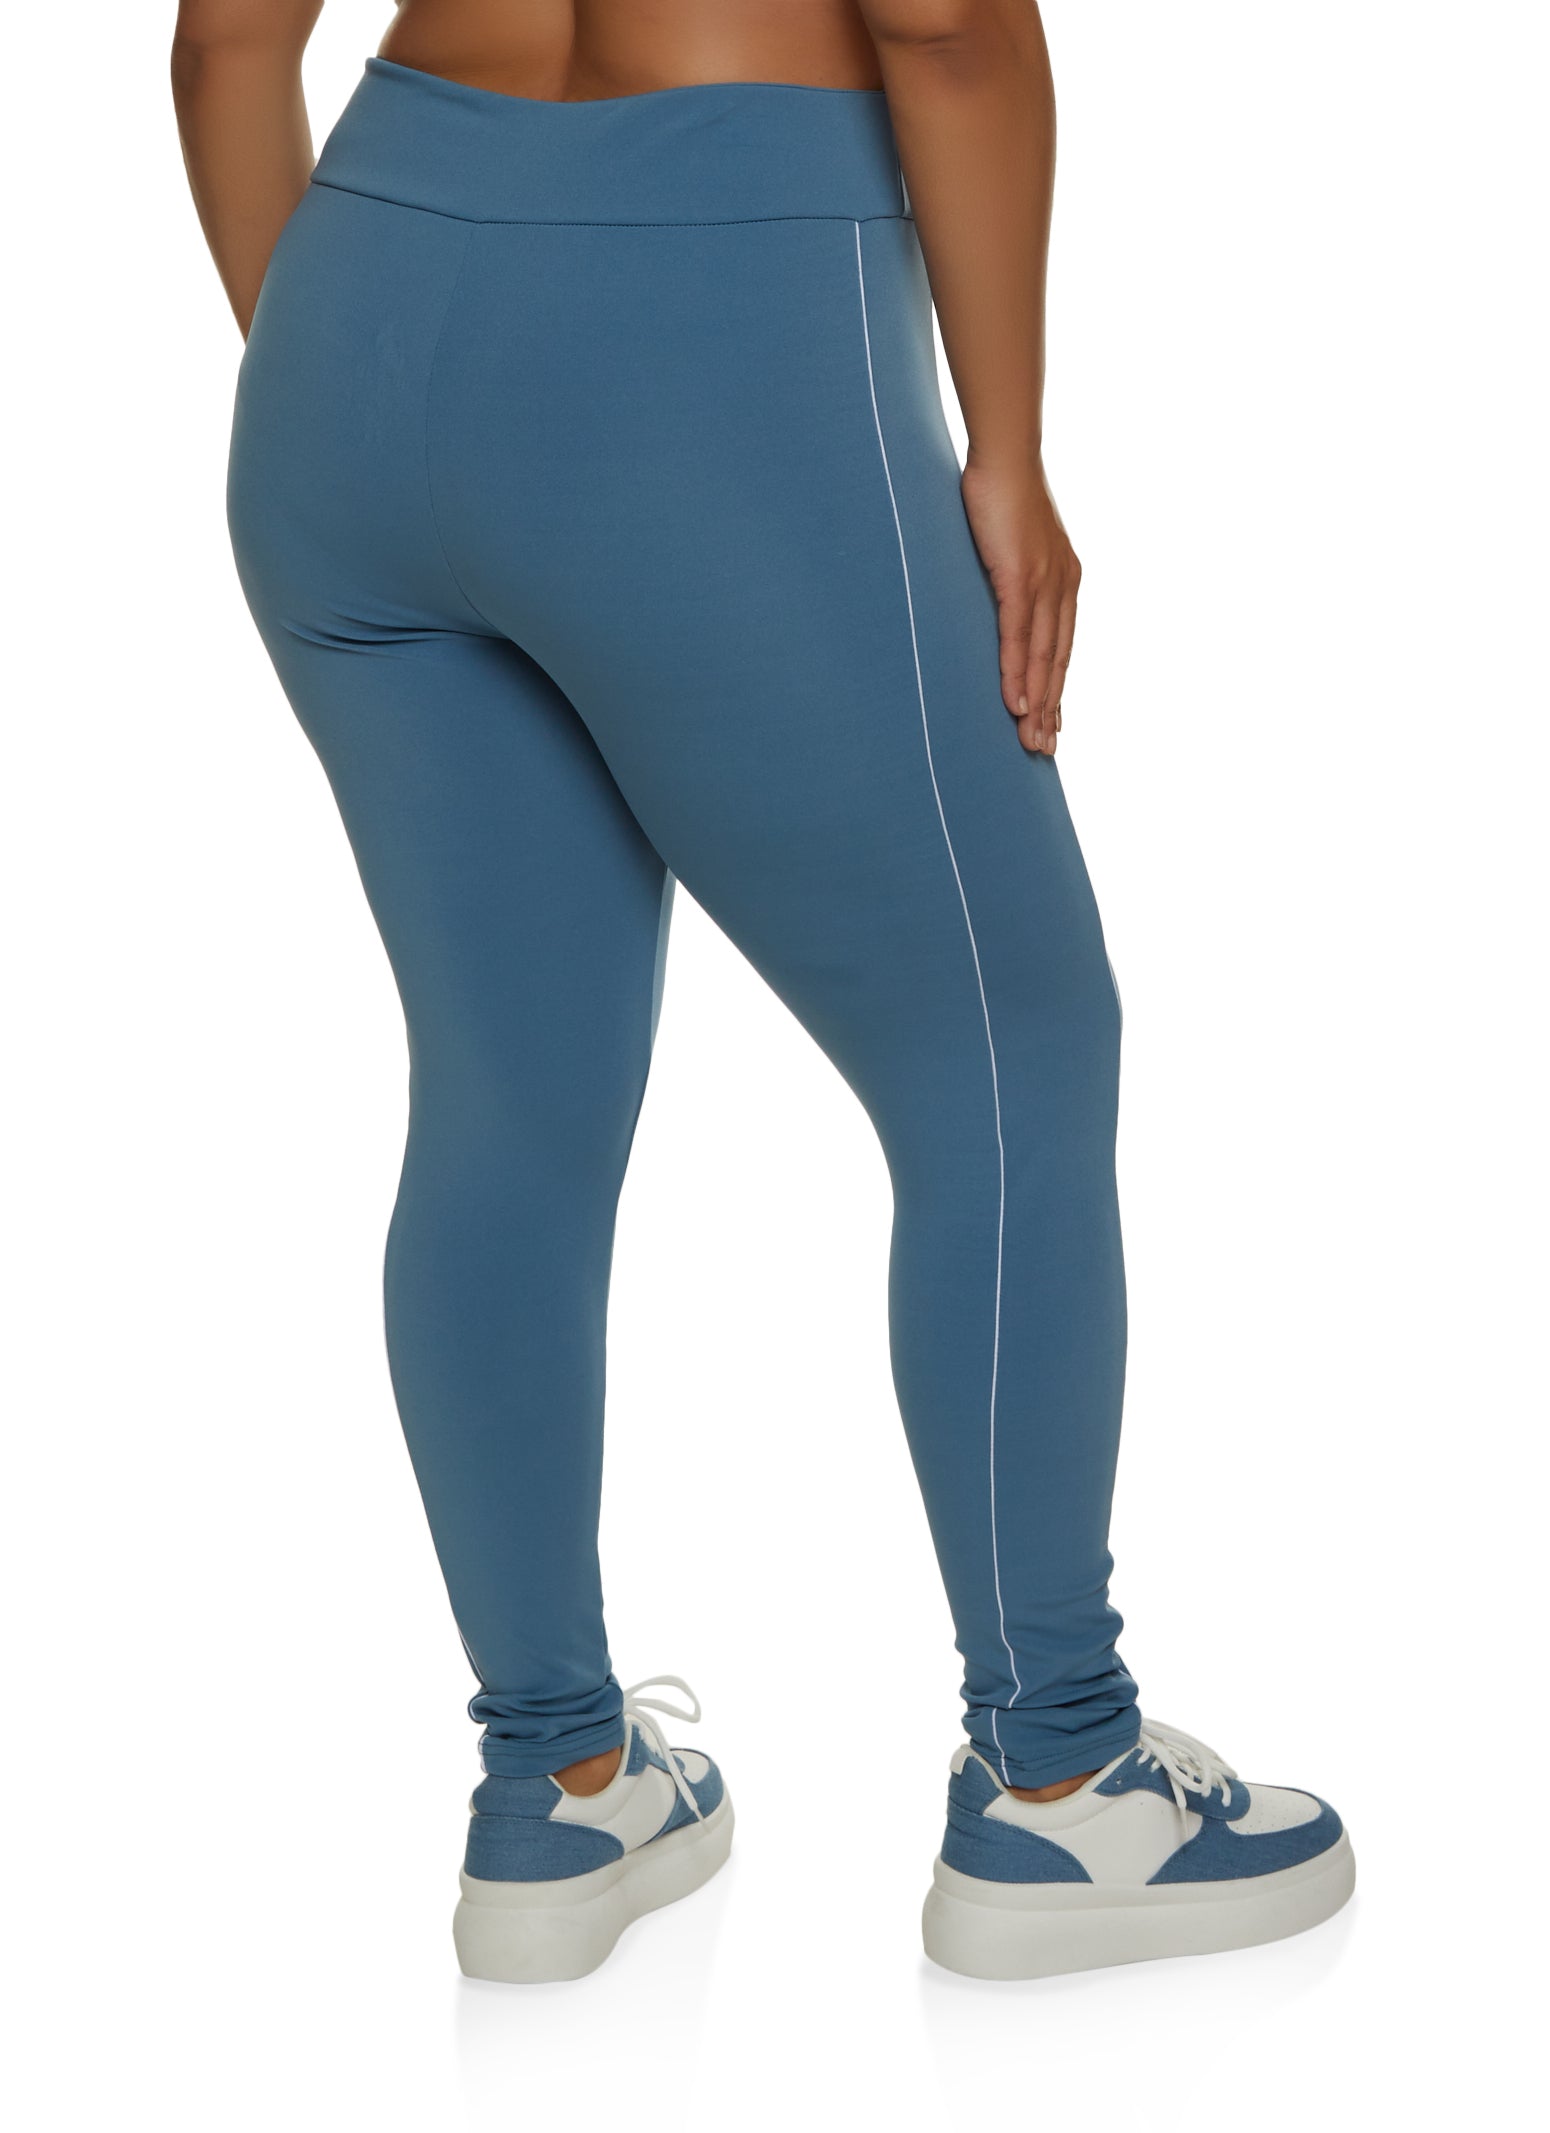 Women's Plus-Size 2 Tone Legging With Contrast Piping 